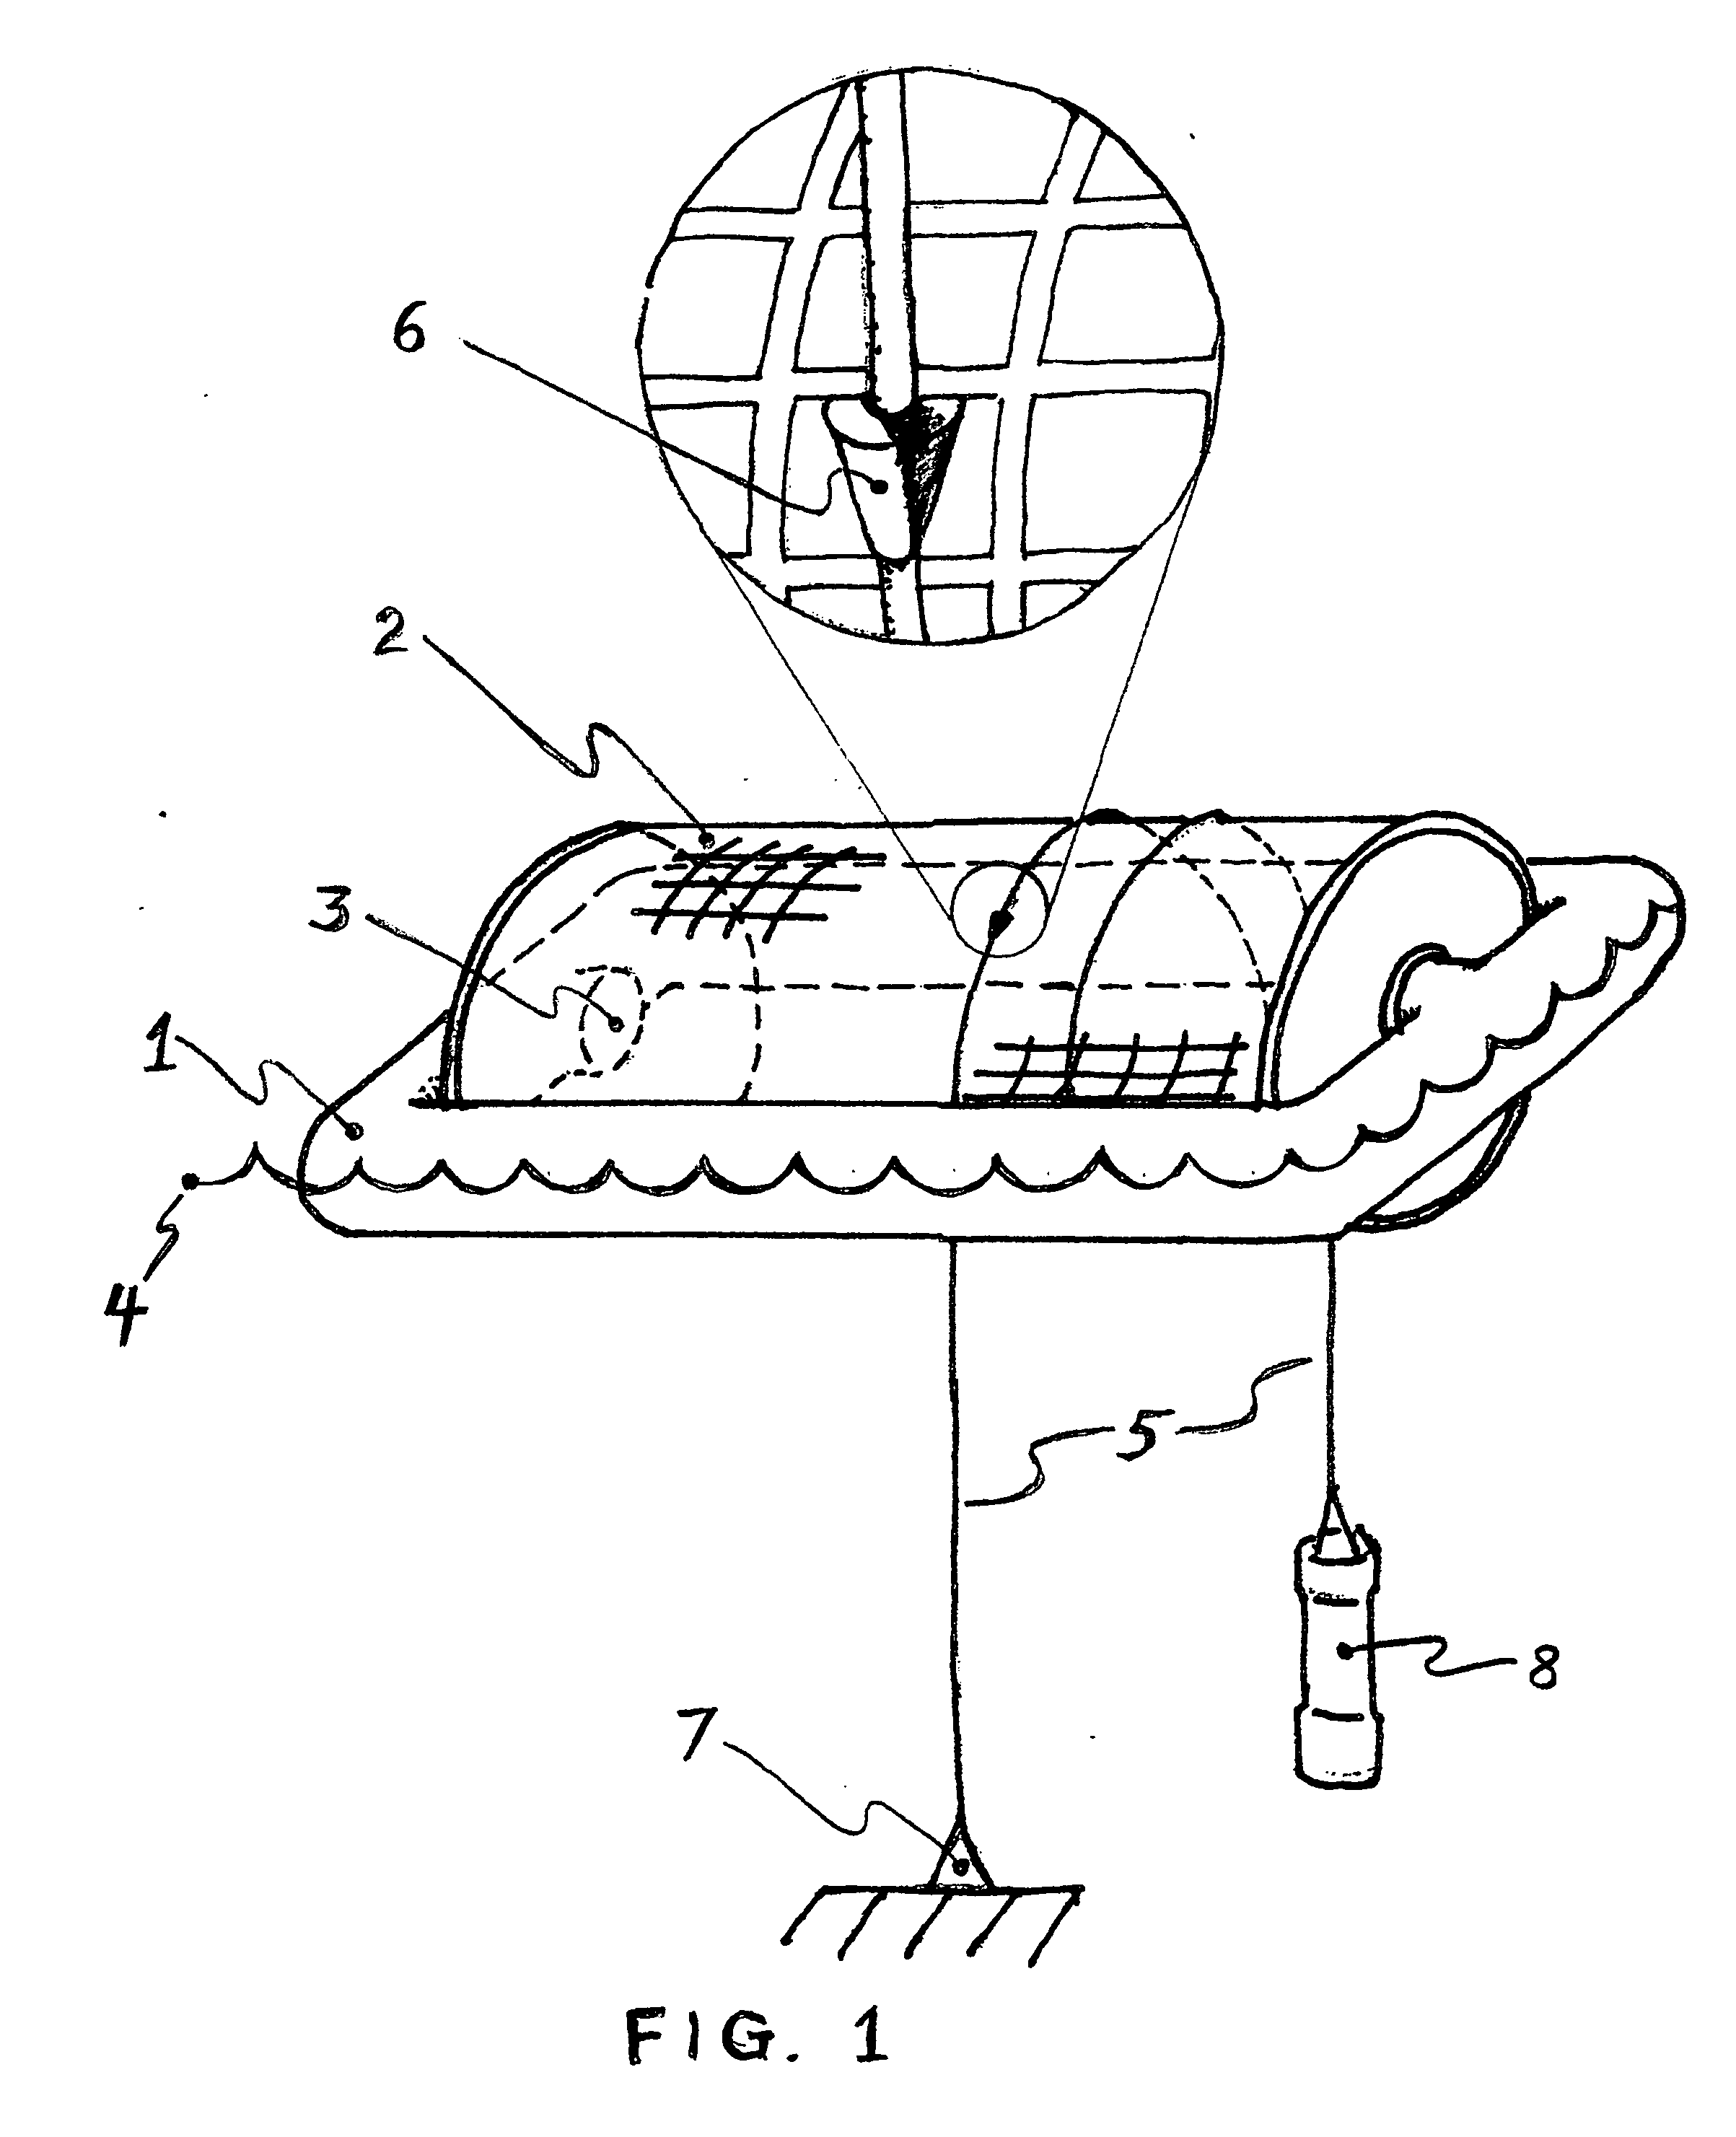 Apparatus for the cultivation of molluscan shellfish and other marine species